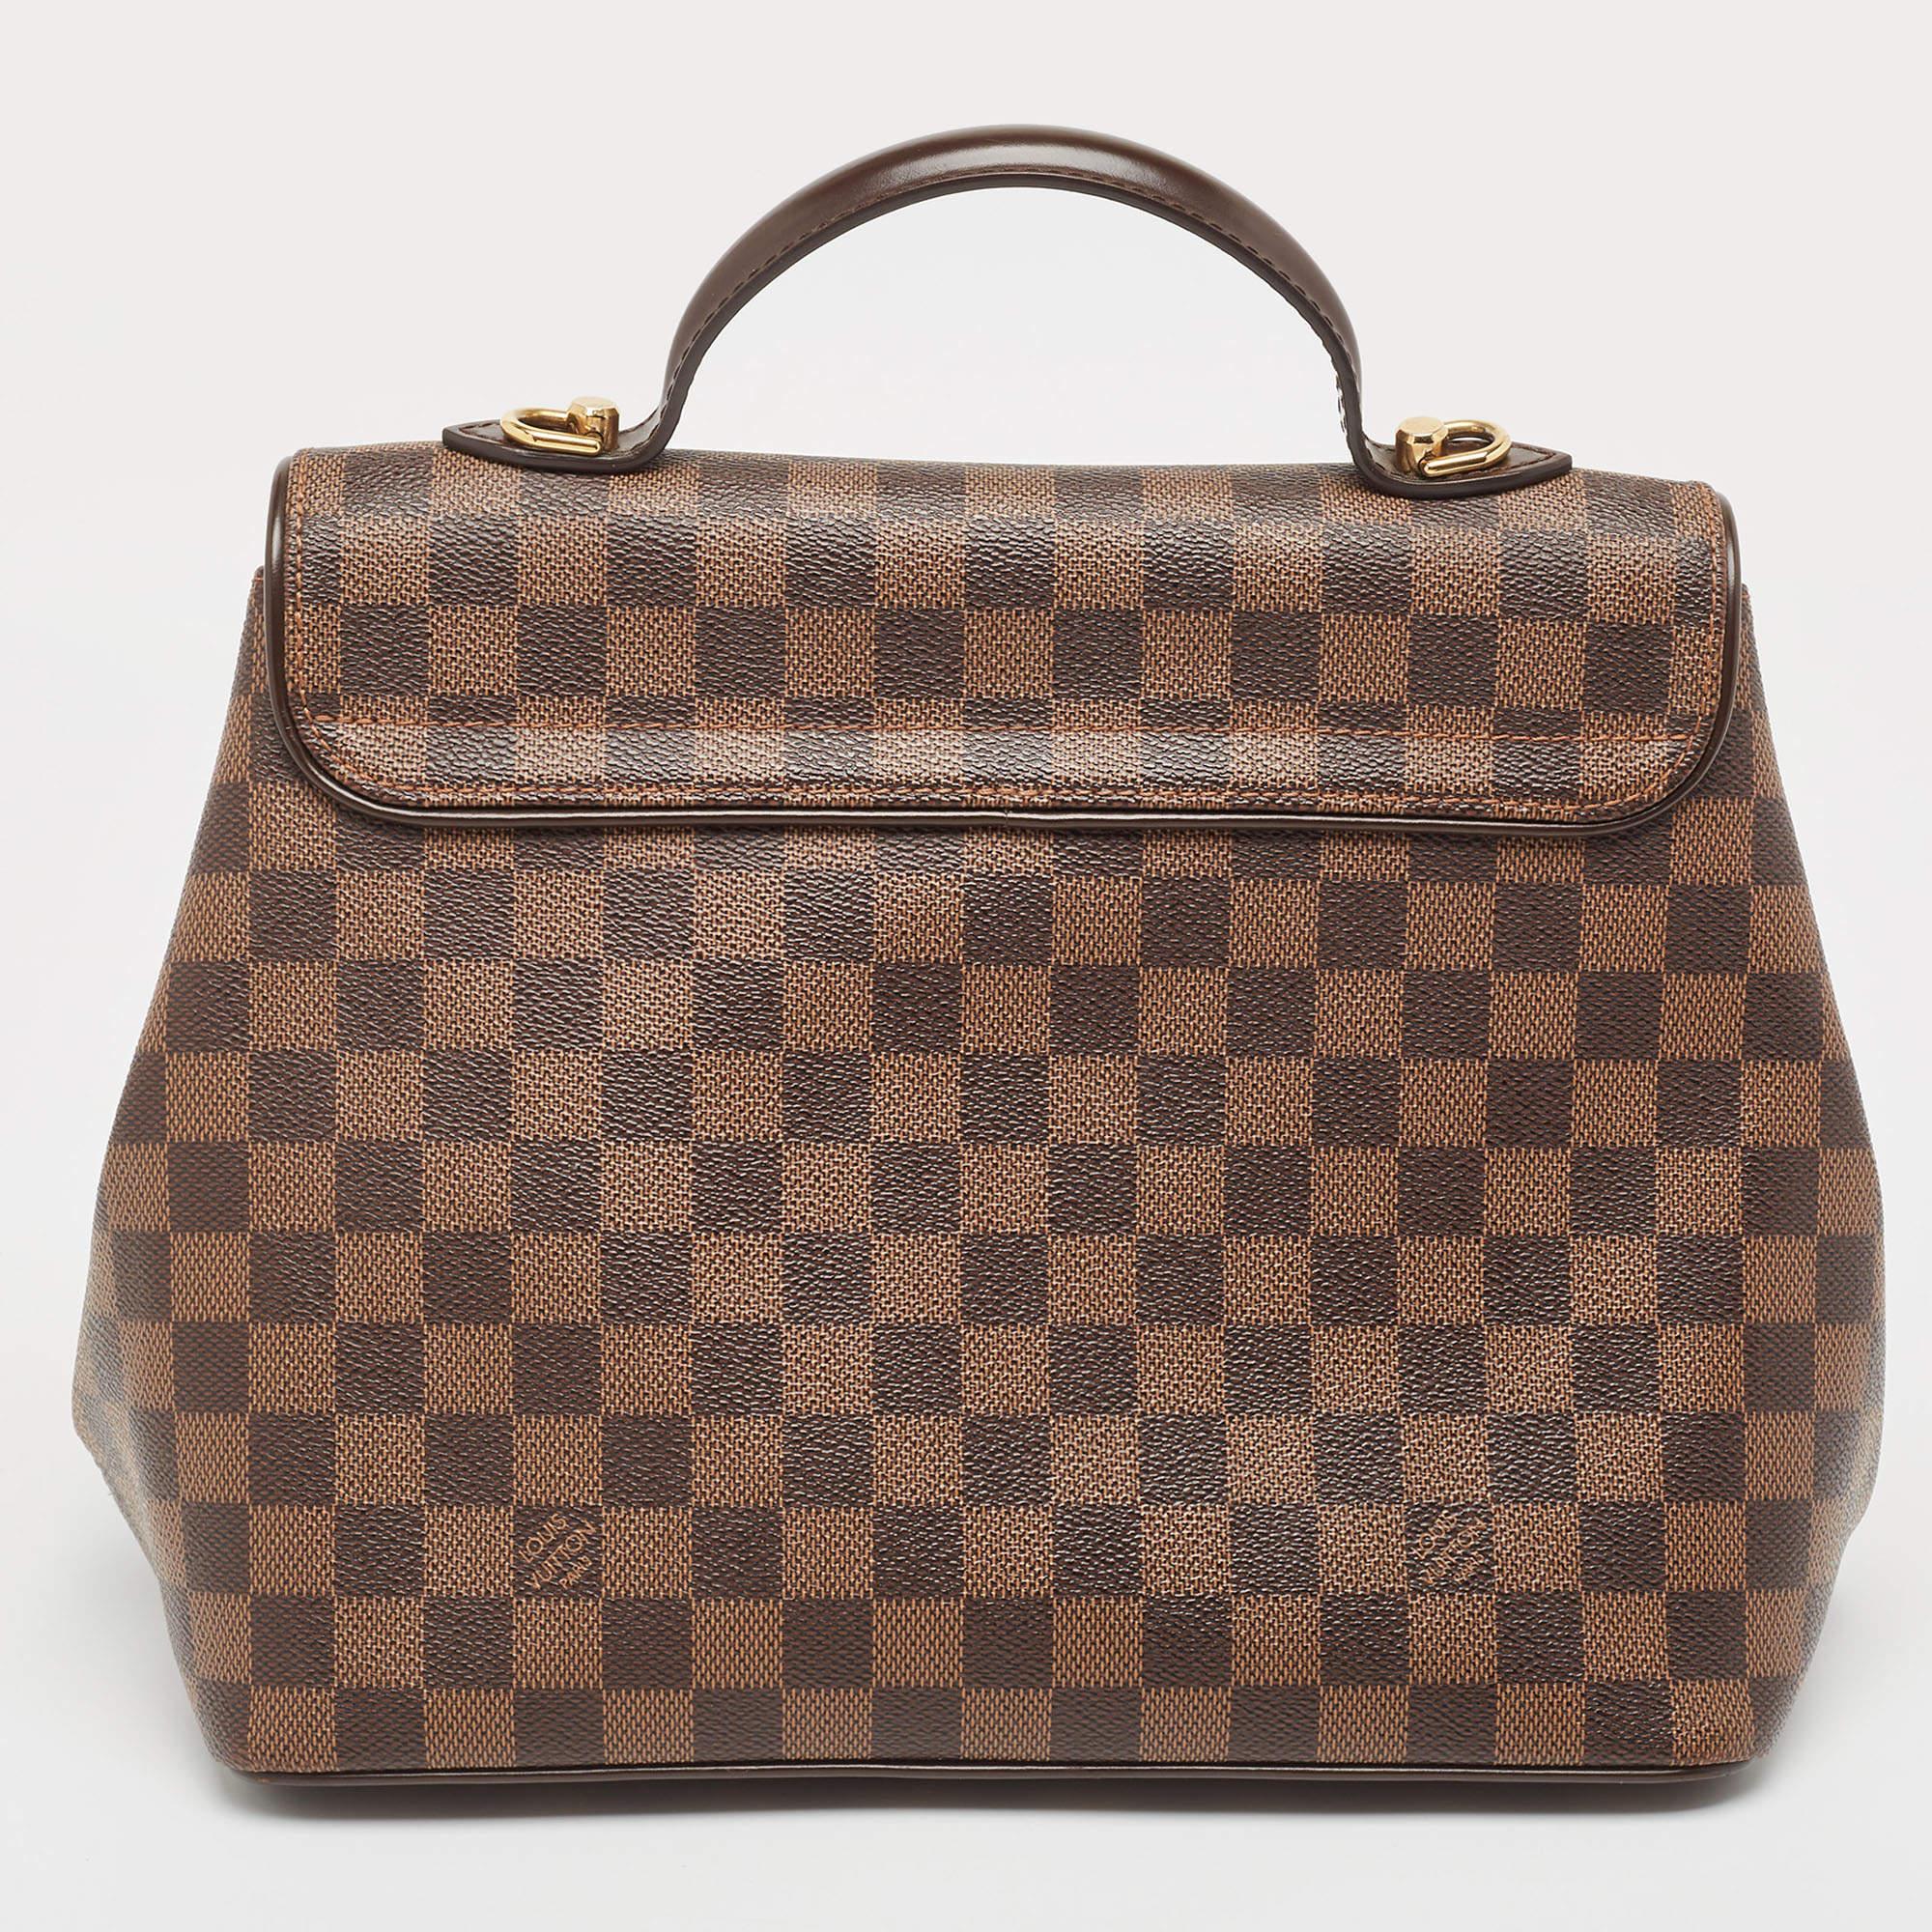 Louis Vuitton's Bergamo bag meets the expectations of what an investment-worthy bag looks like. This creation has been beautifully crafted from signature Damier Ebene canvas & leather and styled with a front flap that has a twist lock. The insides